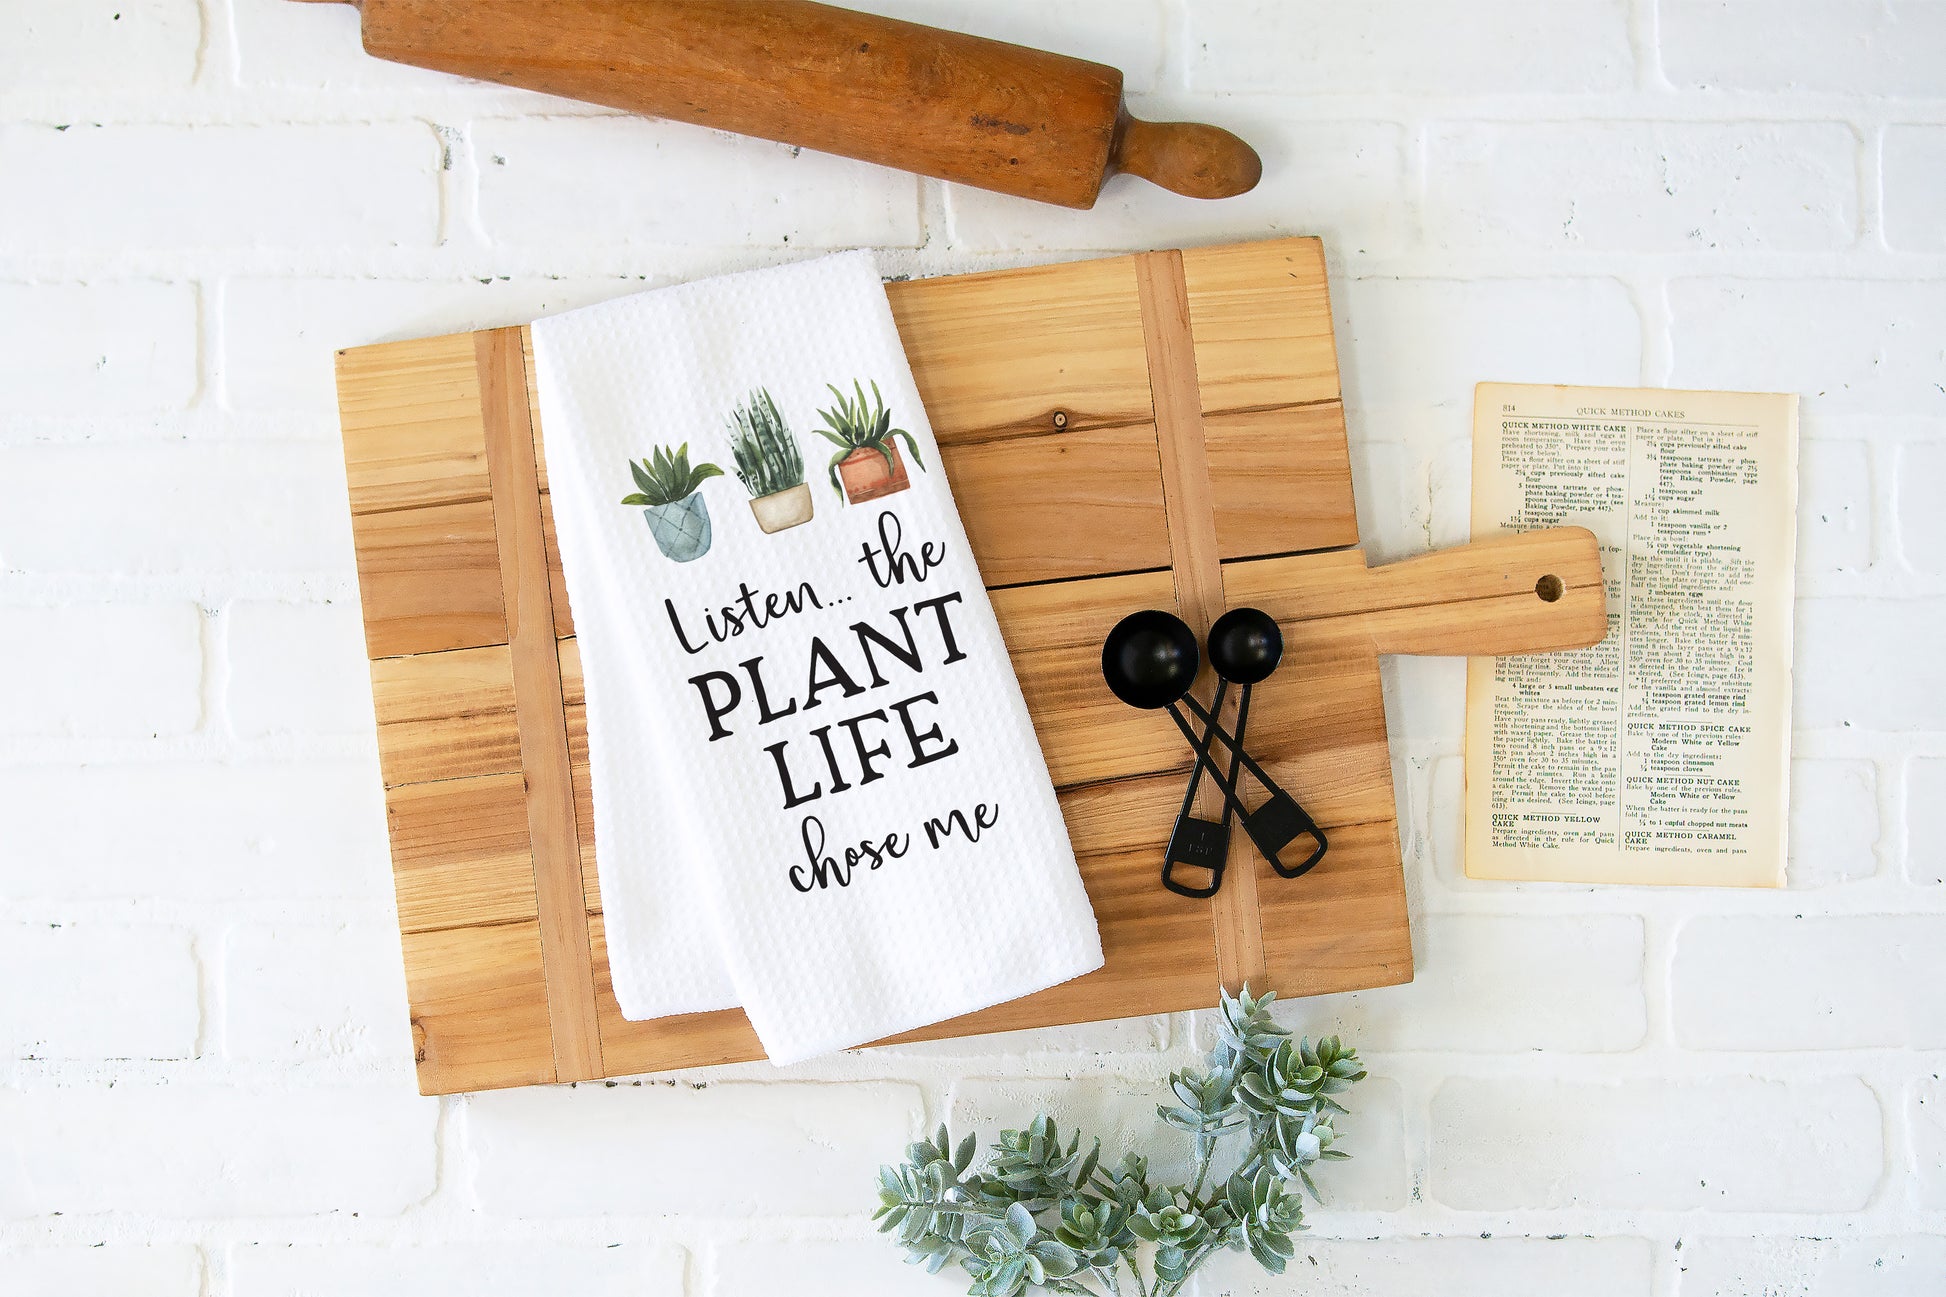 About Me - Planted in the Kitchen